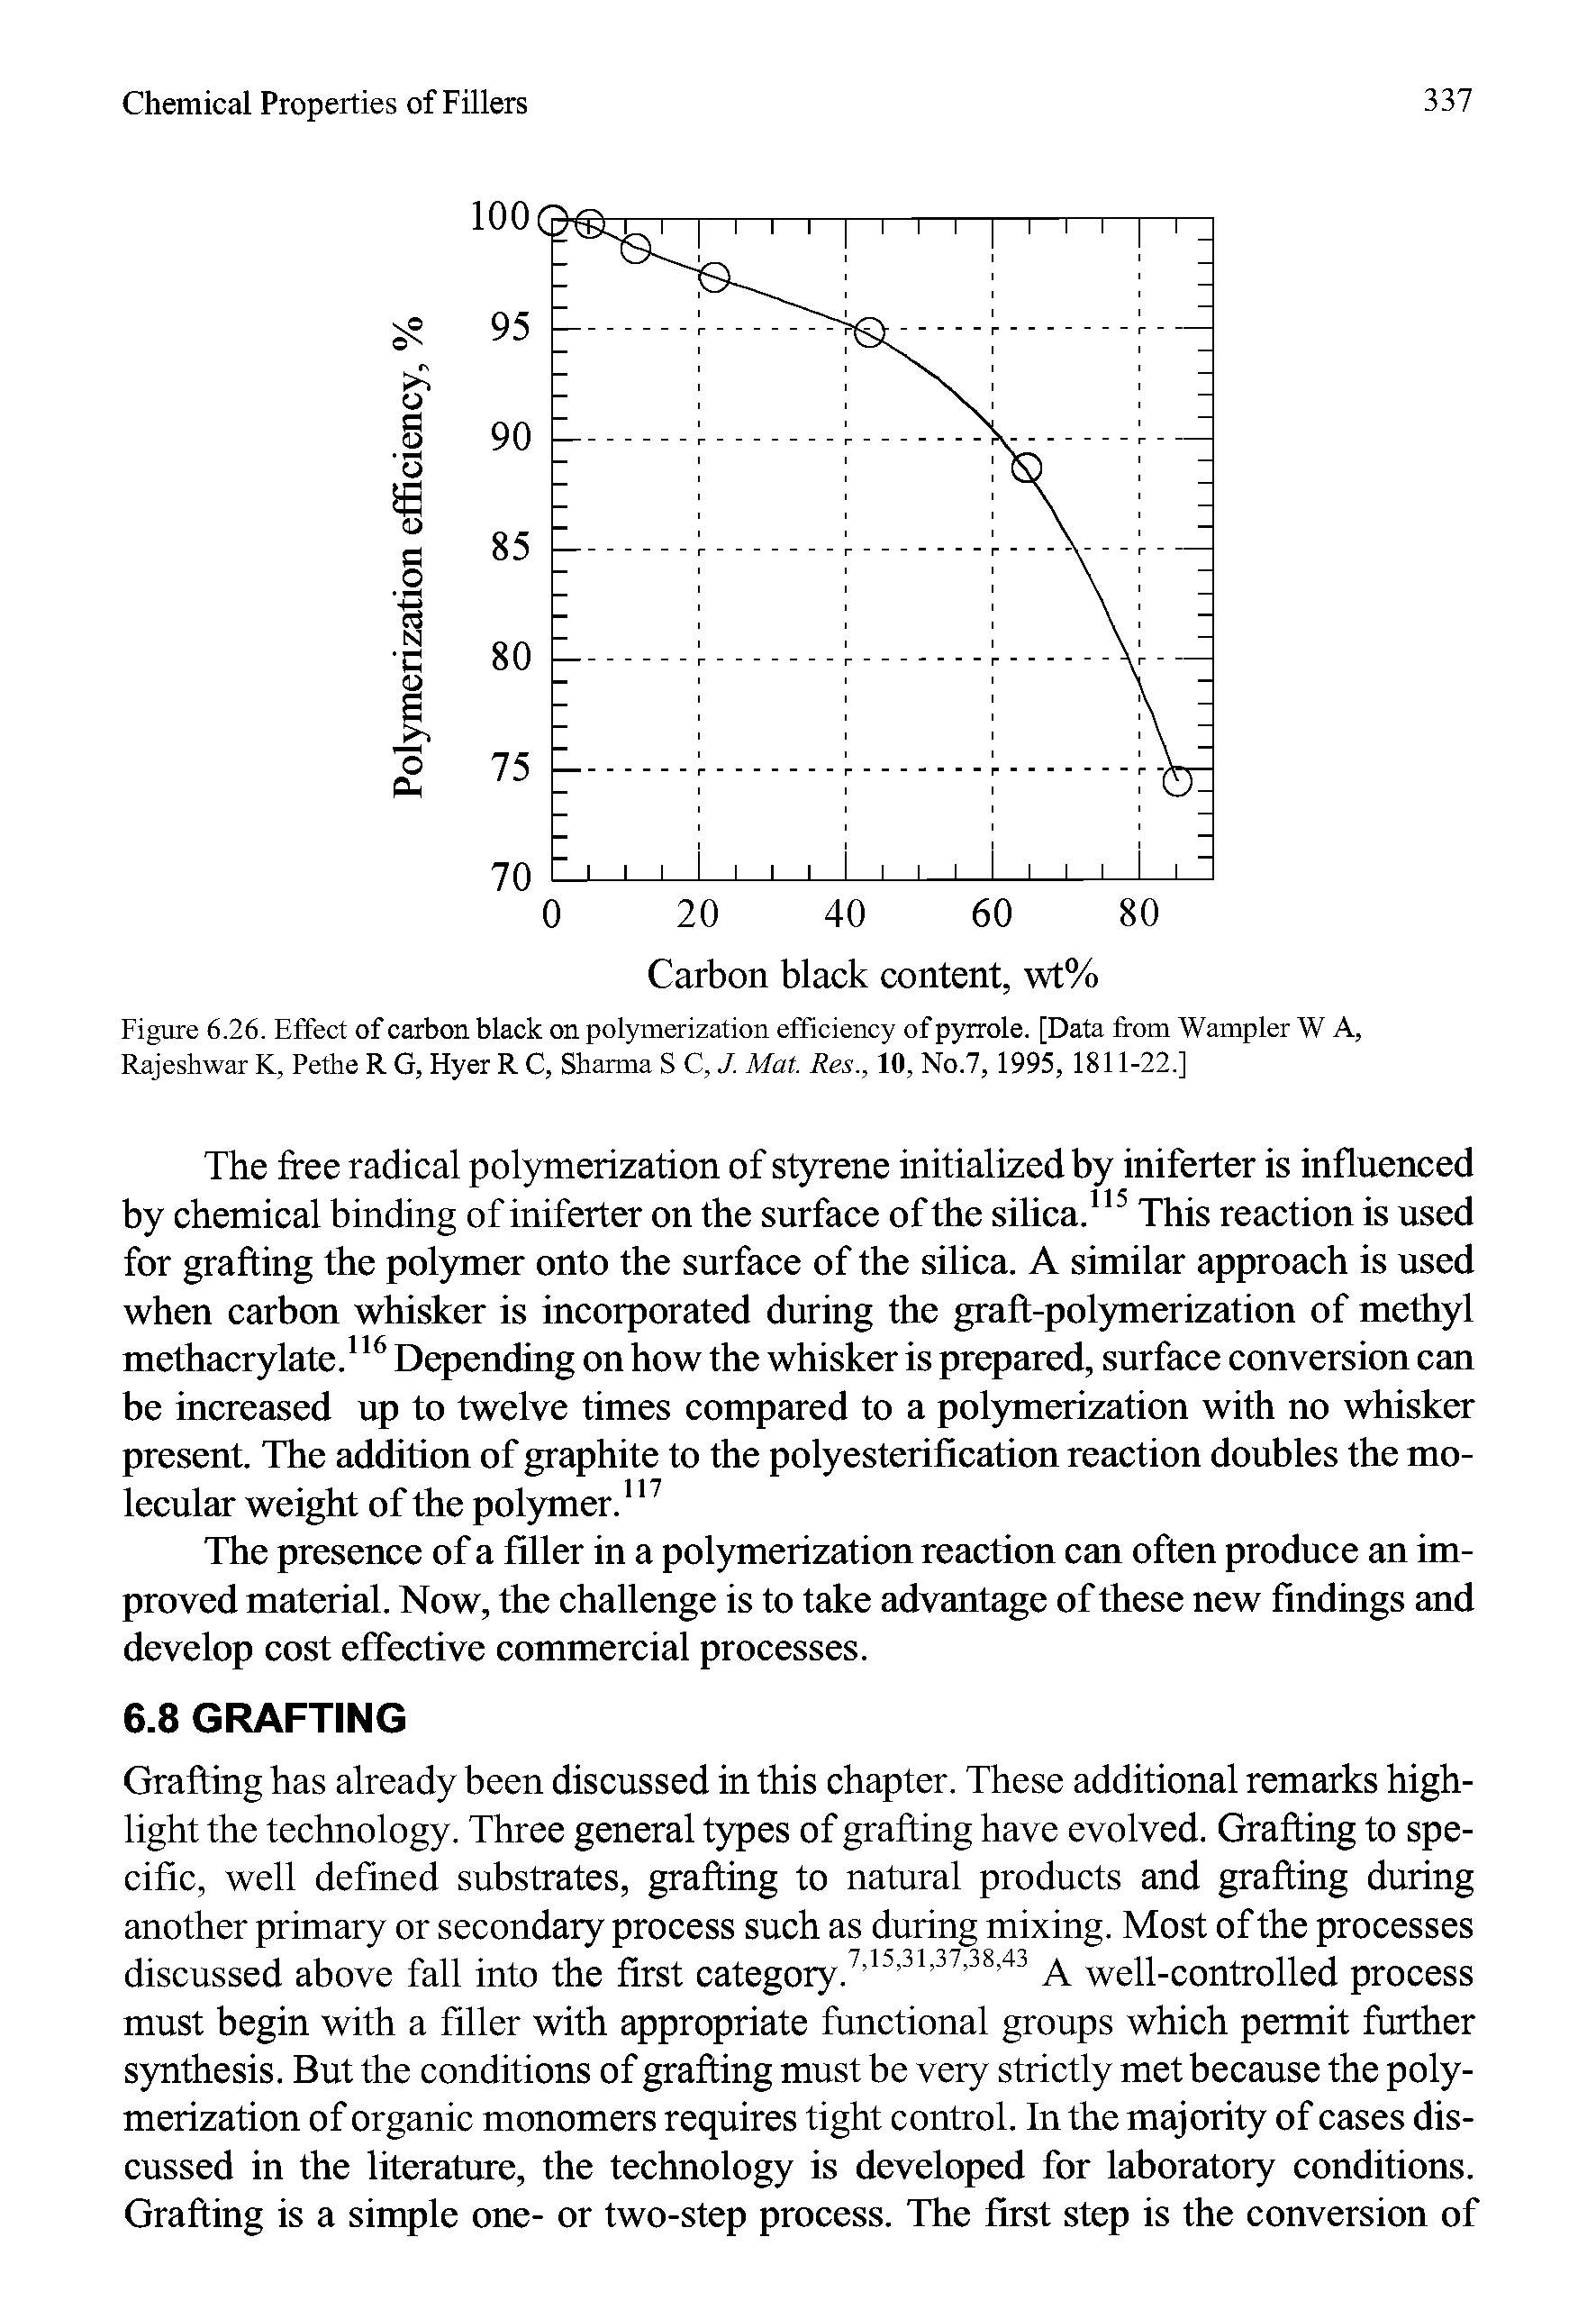 Figure 6.26. Effect of carbon black on polymerization efficiency of pyrrole. [Data from Wampler W A, Rajeshwar K. Pethe R G, Hyer R C, Sharma S C, J. Mat. Res., 10, No.7, 1995, 1811-22.]...